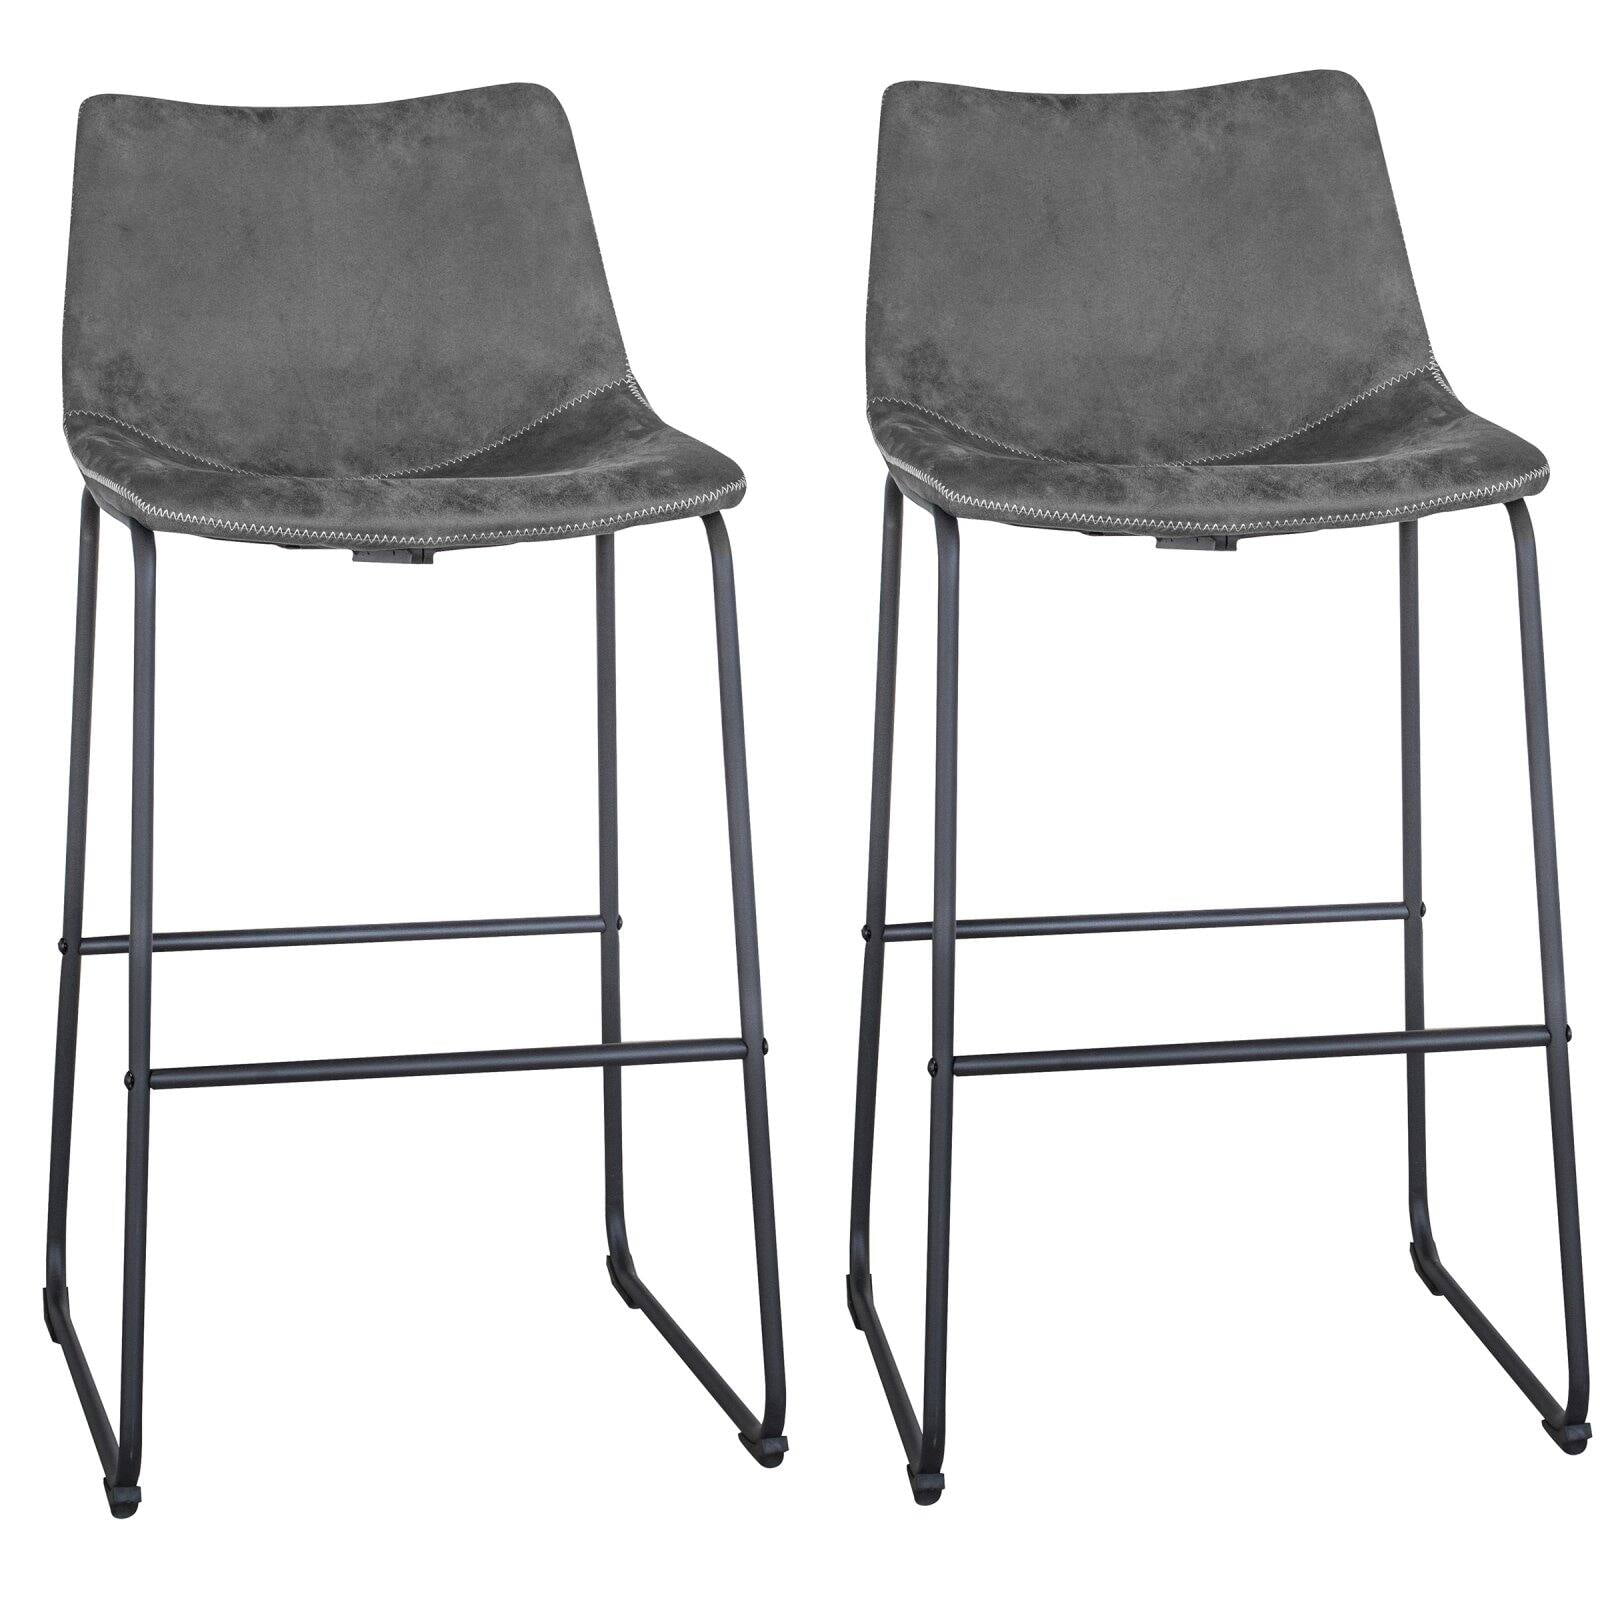 Bslcgset Classic Gray Faux Leather Bar Chair Set